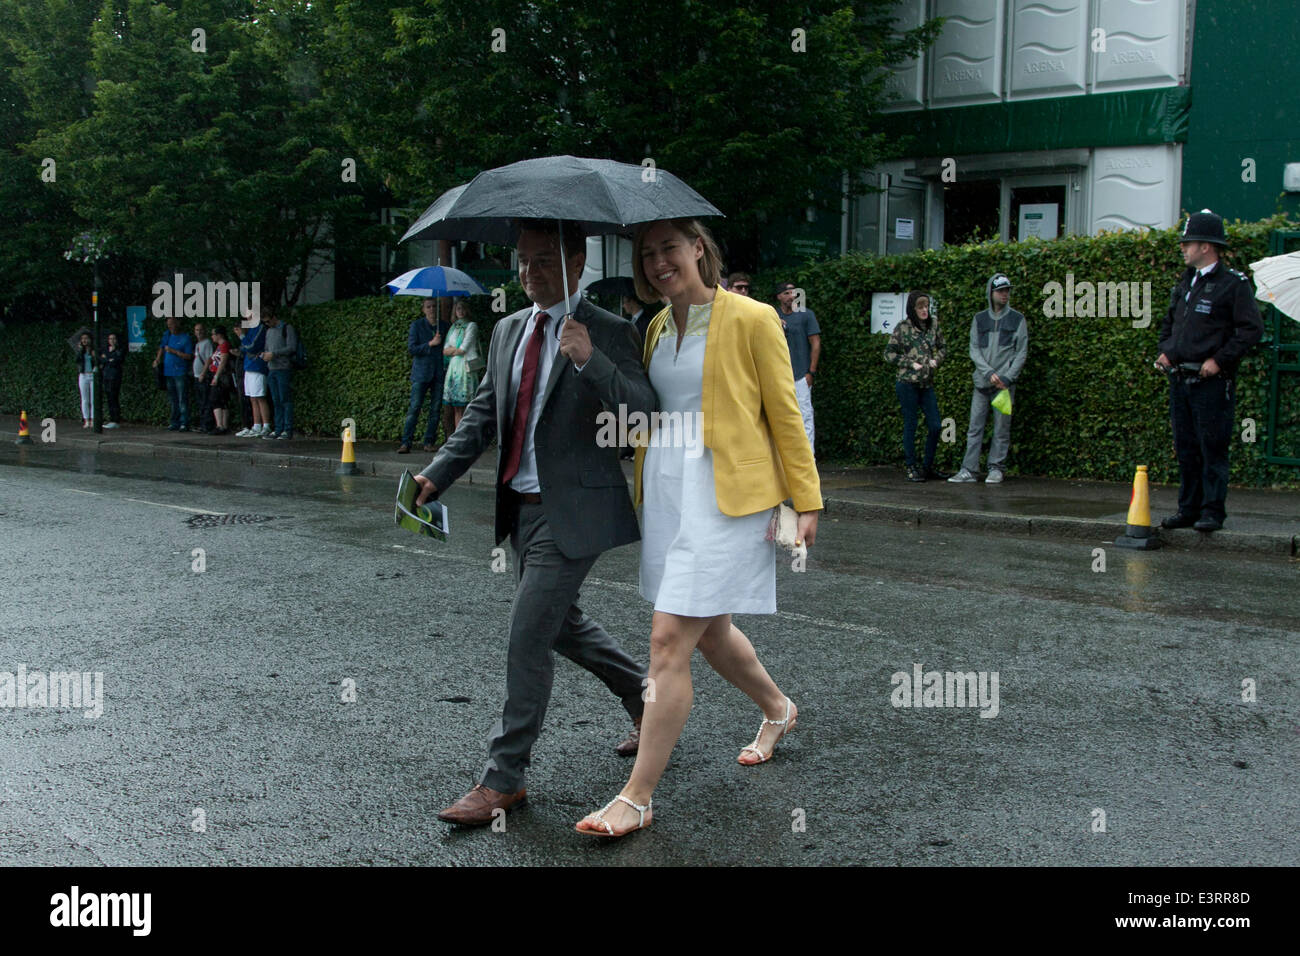 Wimbledon London,UK. 28th June 2014. Sochi Olympic gold medallist Lizzie Yarnold arrives as guest on the 6th day of the 2014  lawn tennis championships Credit:  amer ghazzal/Alamy Live News Stock Photo